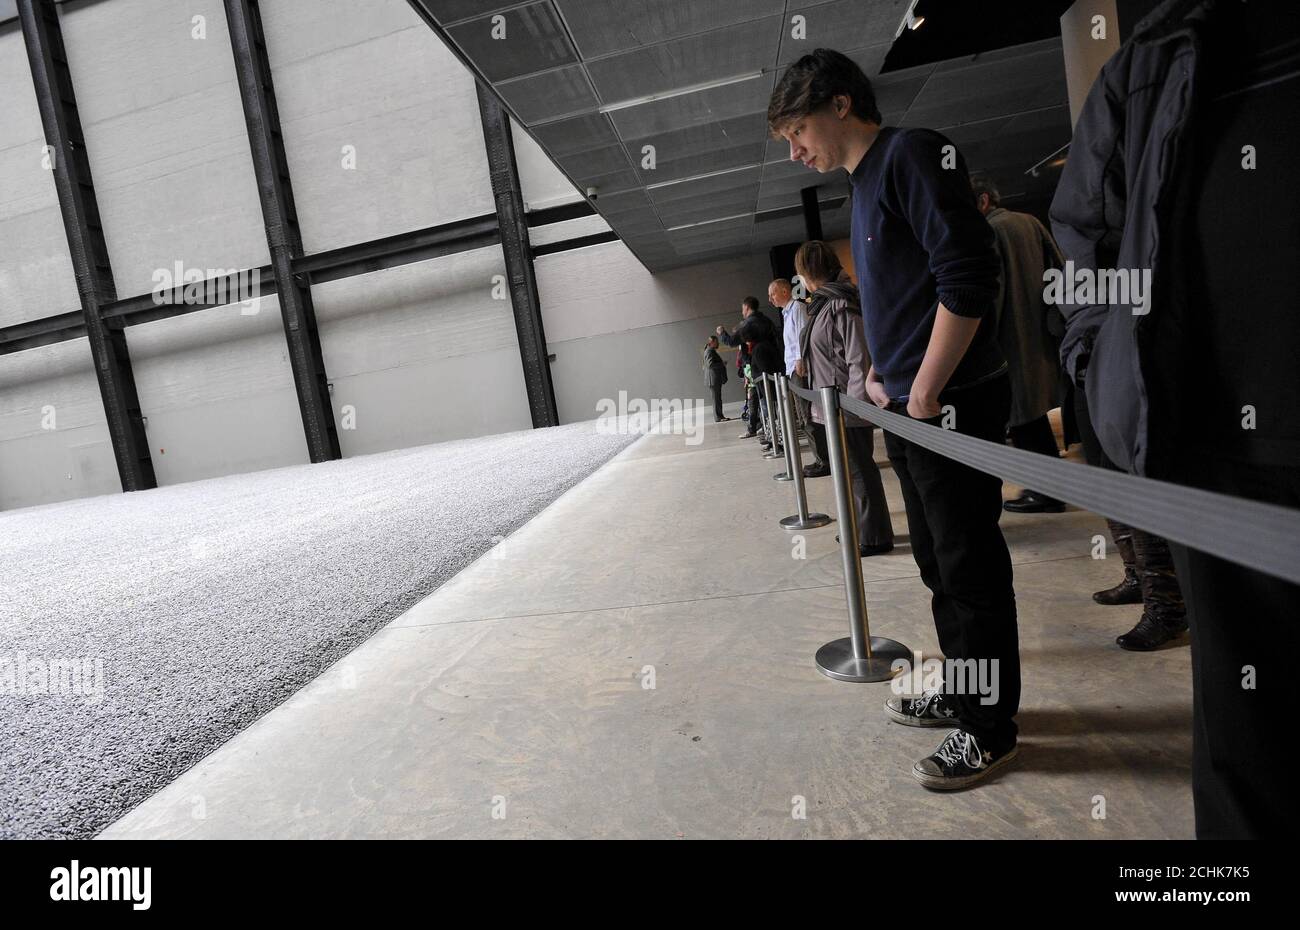 Visitors view the new Tate Modern Turbine Hall installation by Ai Weiwei in London which has been declared out of bounds after health risk concerns over dust. Stock Photo